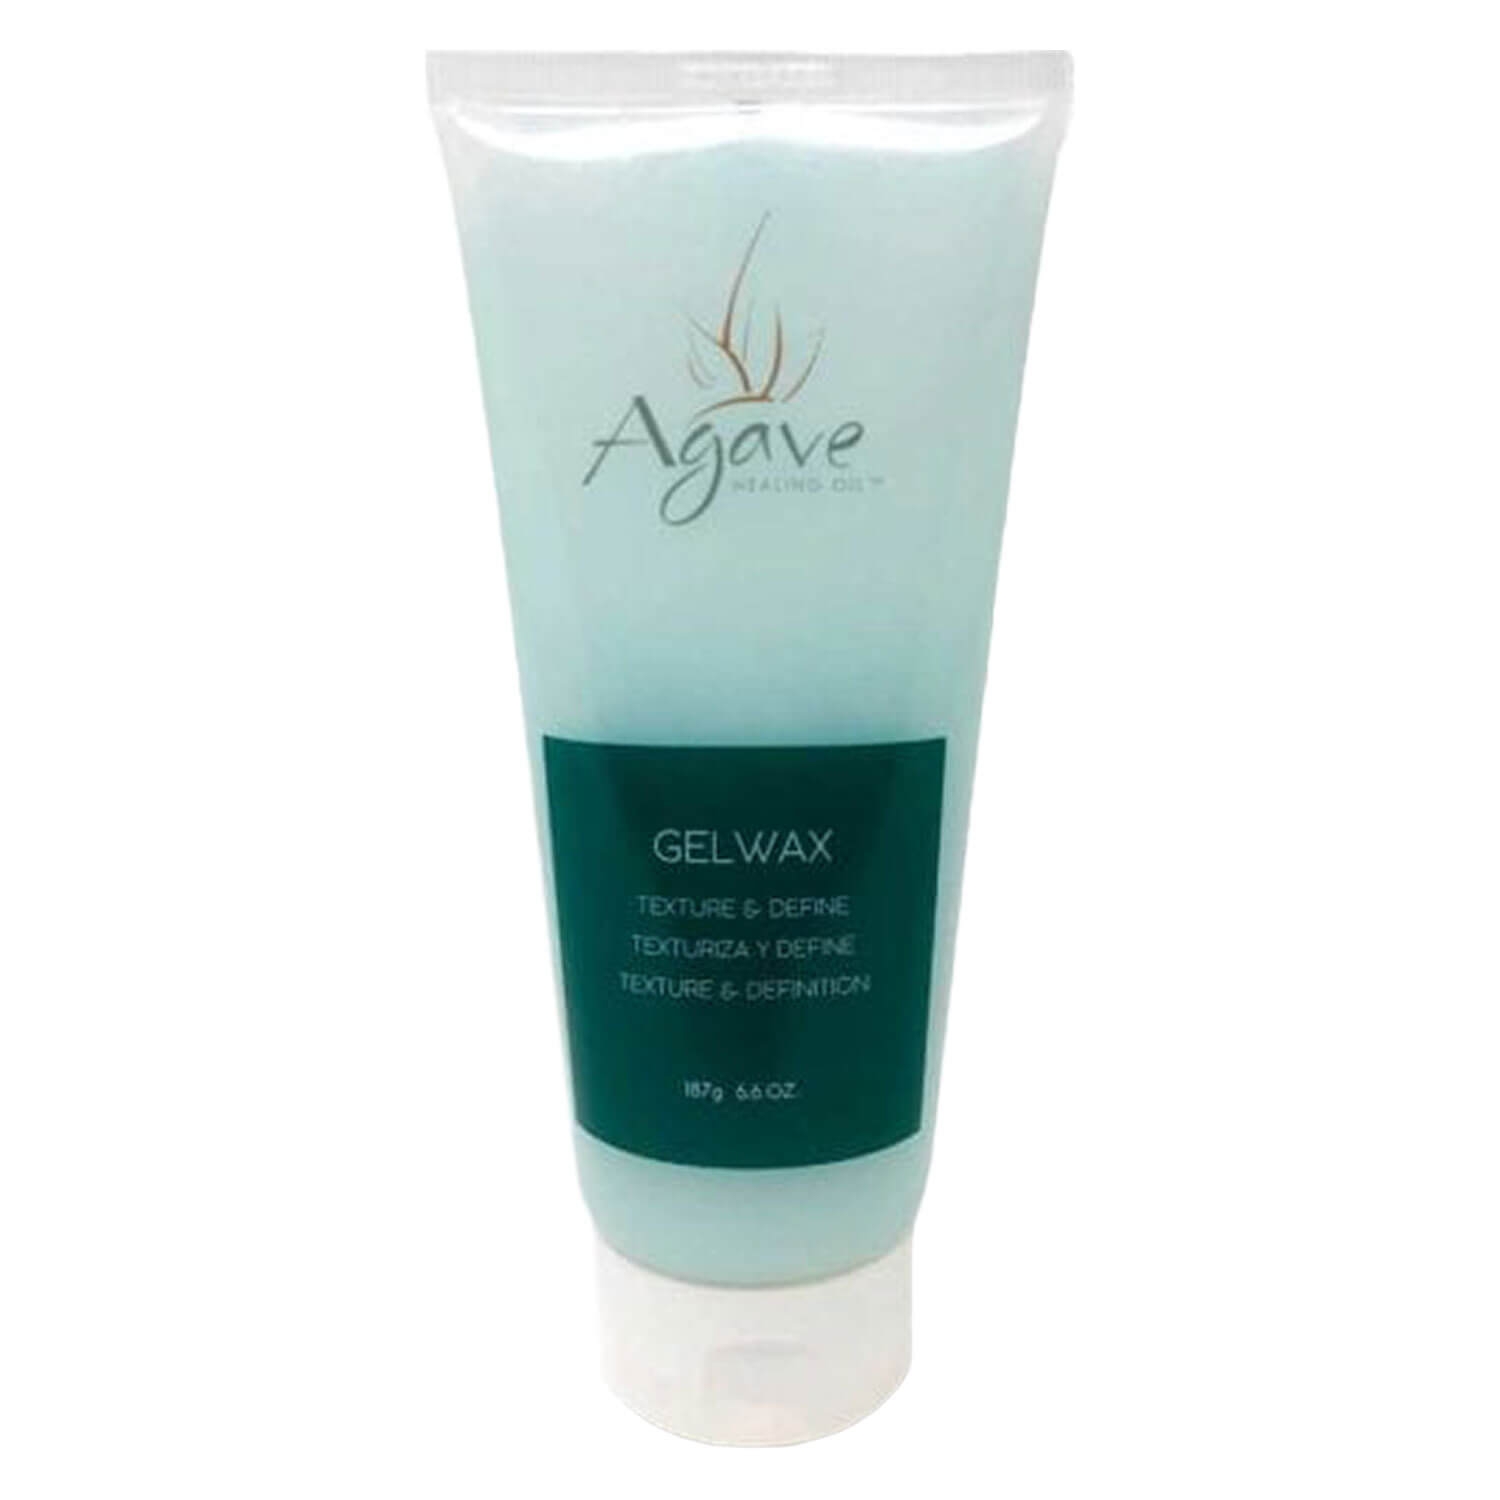 Product image from Agave - Gel Wax